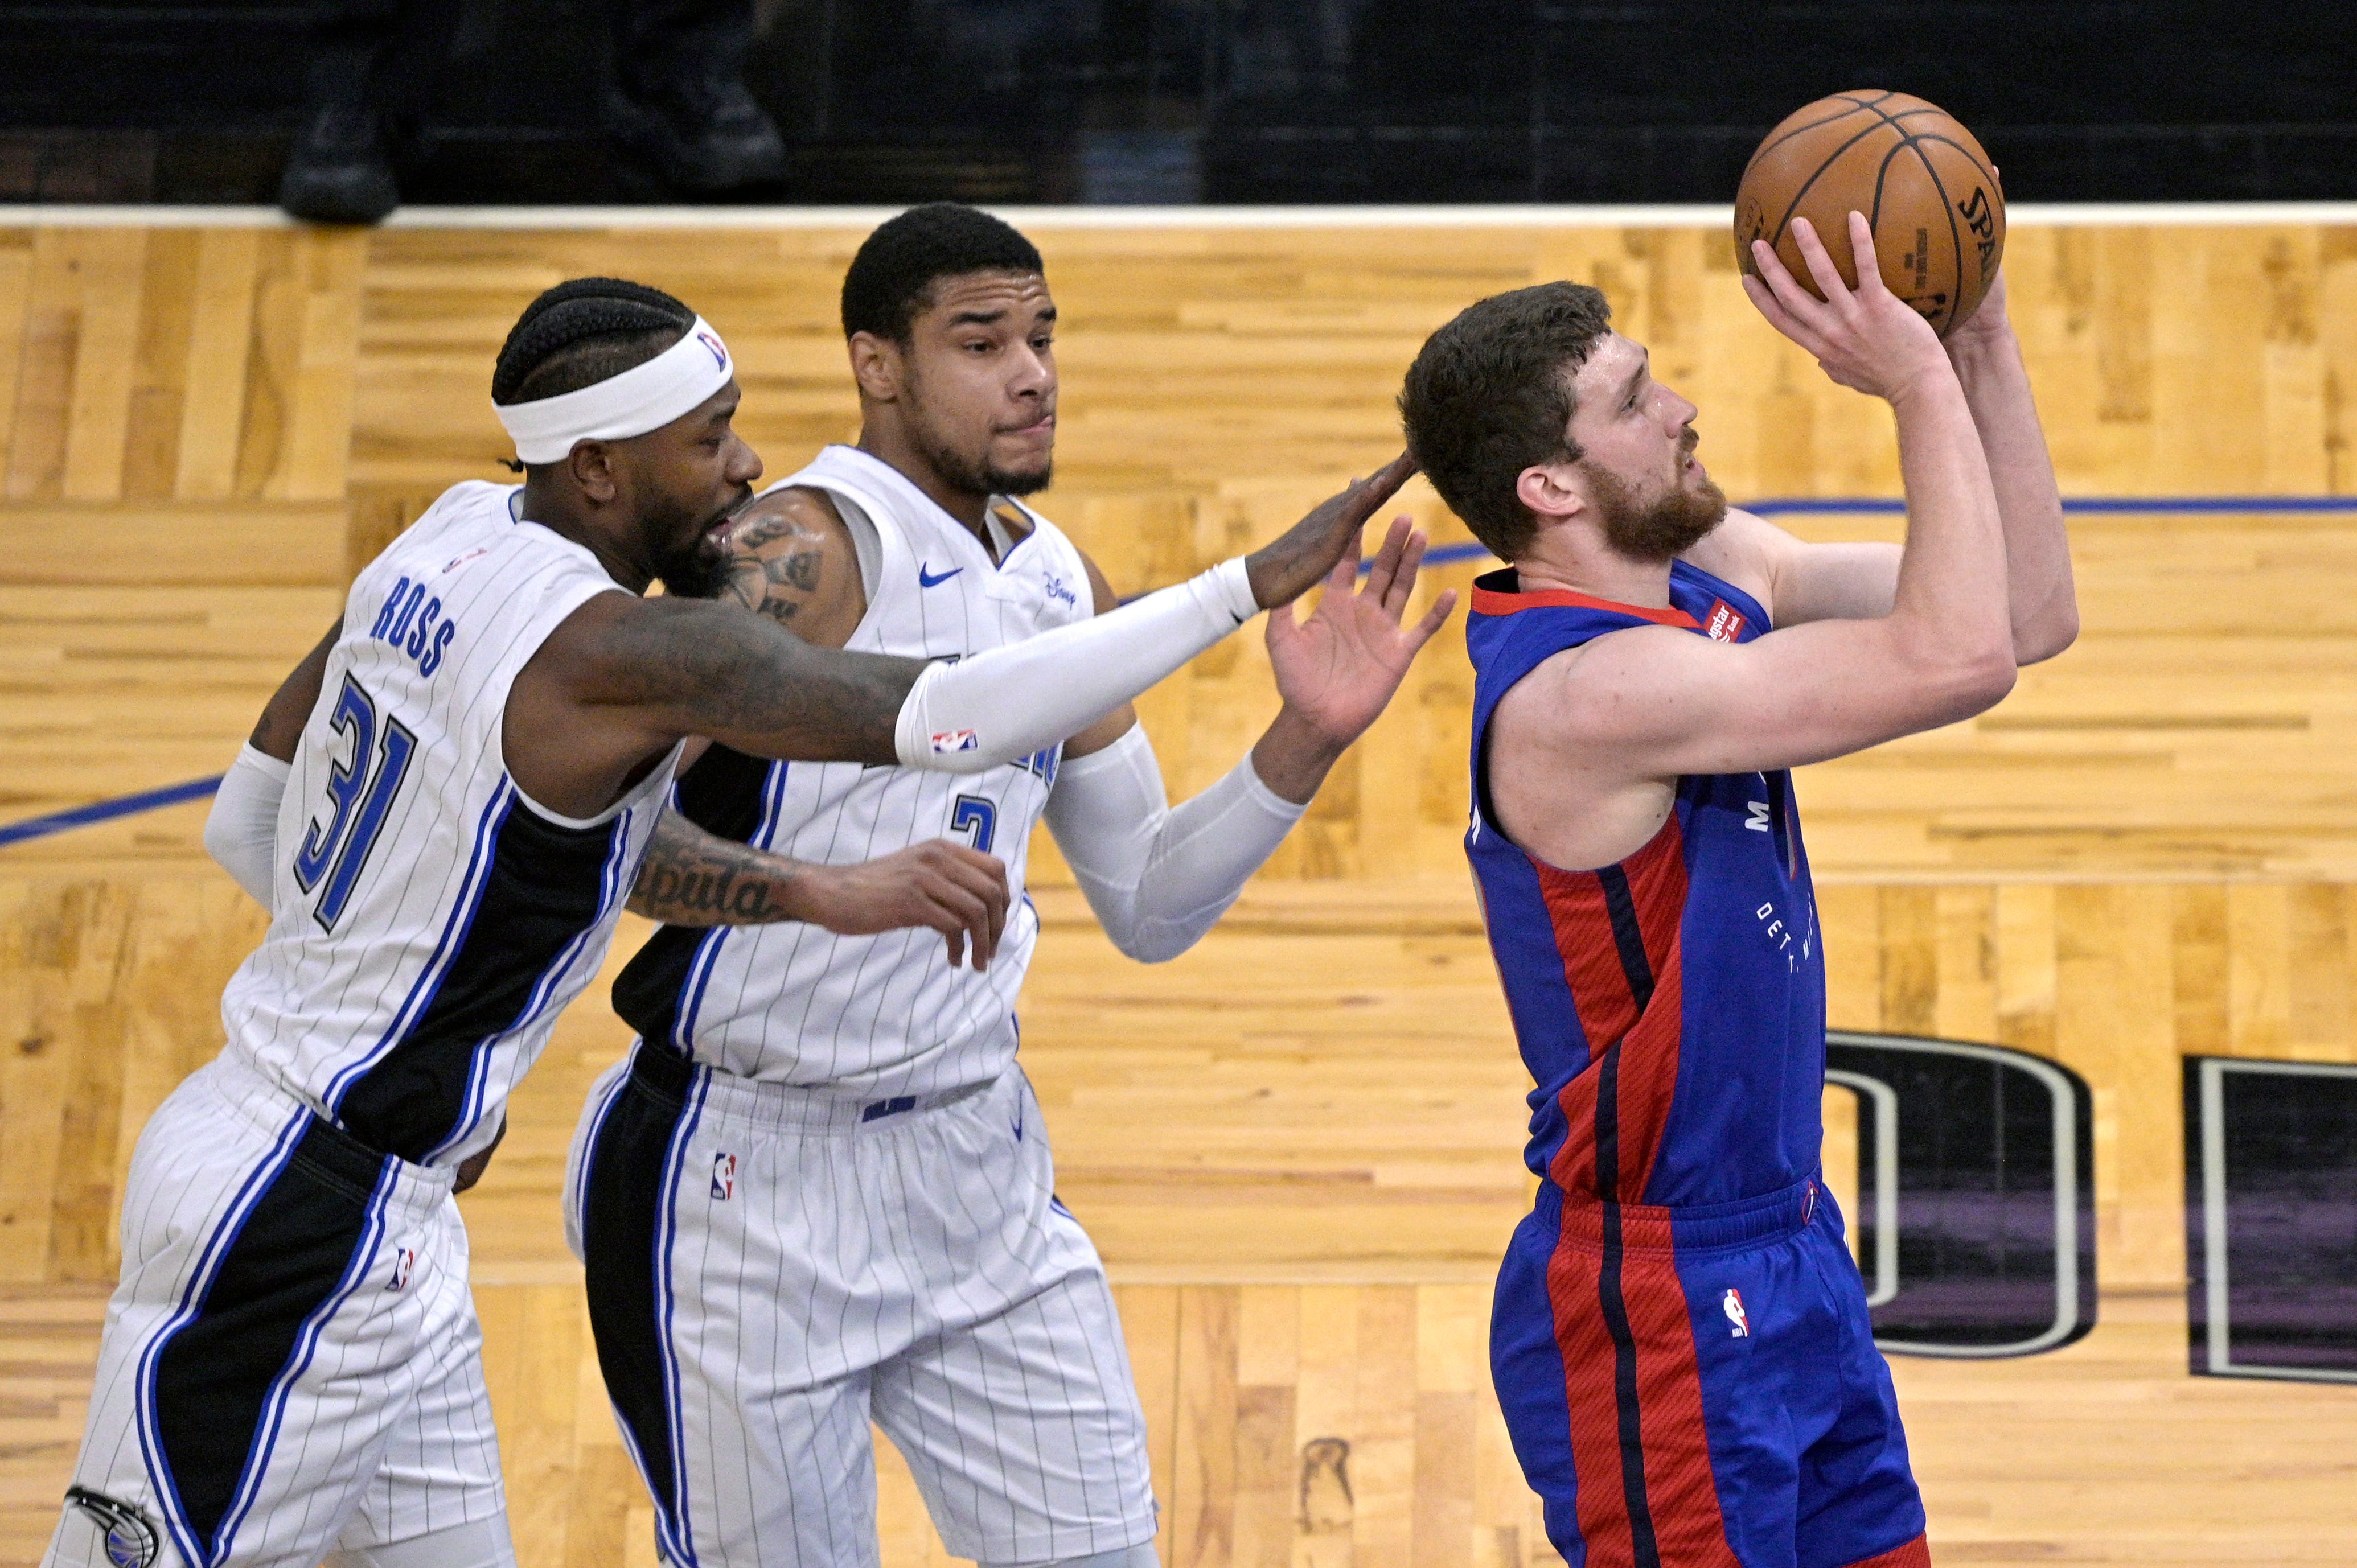 Detroit Pistons guard Svi Mykhailiuk, right, goes up for a shot in front of Orlando Magic guard Terrence Ross, left, and forward Chuma Okeke, center,  during the first half of an NBA basketball game.